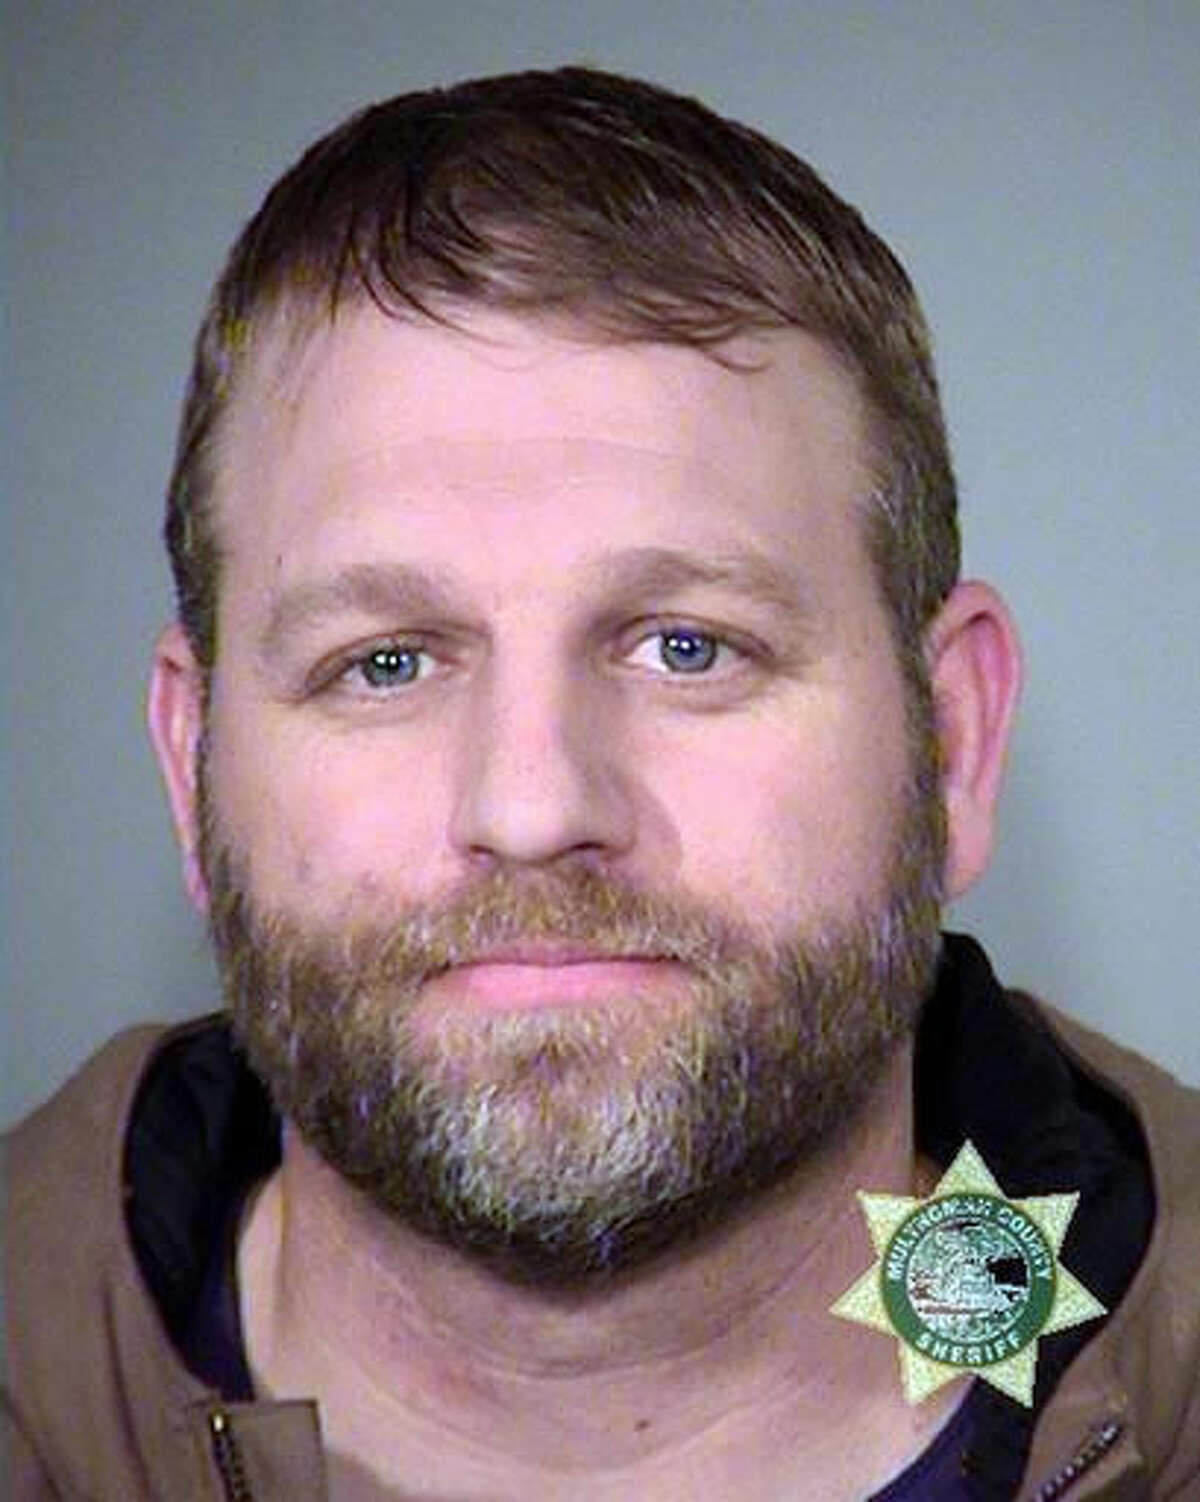 FILE--This Jan. 27, 2016, photo provided by the Multnomah County Sheriff's Office shows Ammon Bundy, one of the members of an armed group that occupied central Oregon's Malheur National Wildlife Refuge as part of a dispute over public lands in the Western U.S. U.S. District Judge Robert E. Jones said in the declaration Friday, Aug. 5, 2016, that he allowed six defendants accused in the armed occupation of an Oregon wildlife refuge earlier this year to meet with their attorneys, and sometimes with each other, at a special courthouse location after they complained about access to their attorneys. (Multnomah County Sheriff via AP, file)